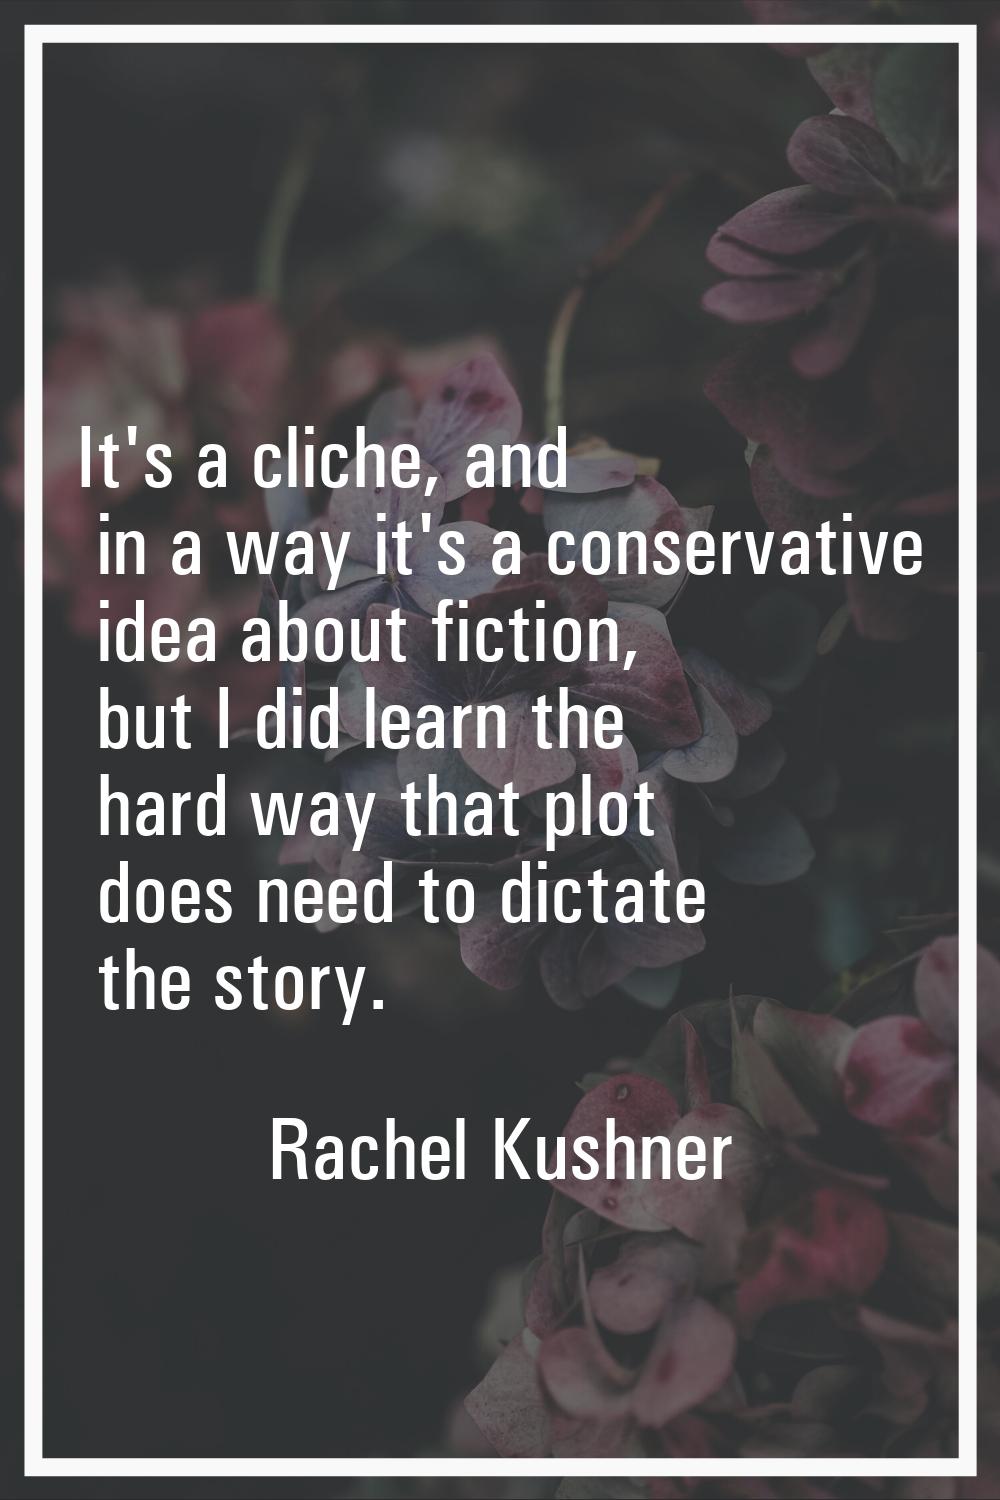 It's a cliche, and in a way it's a conservative idea about fiction, but I did learn the hard way th